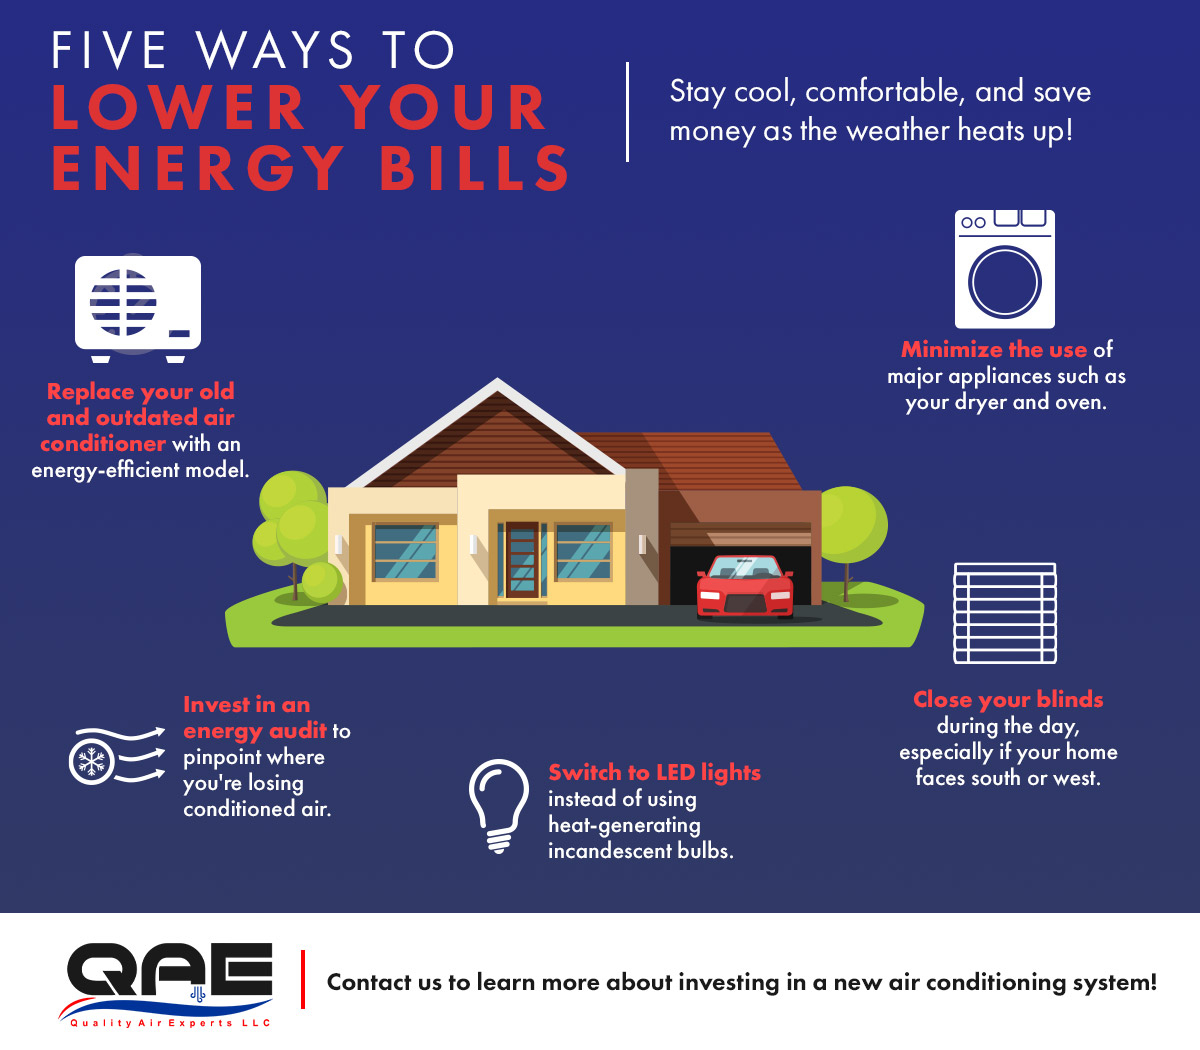 5 Ways To Lower Your Energy Bill.jpg